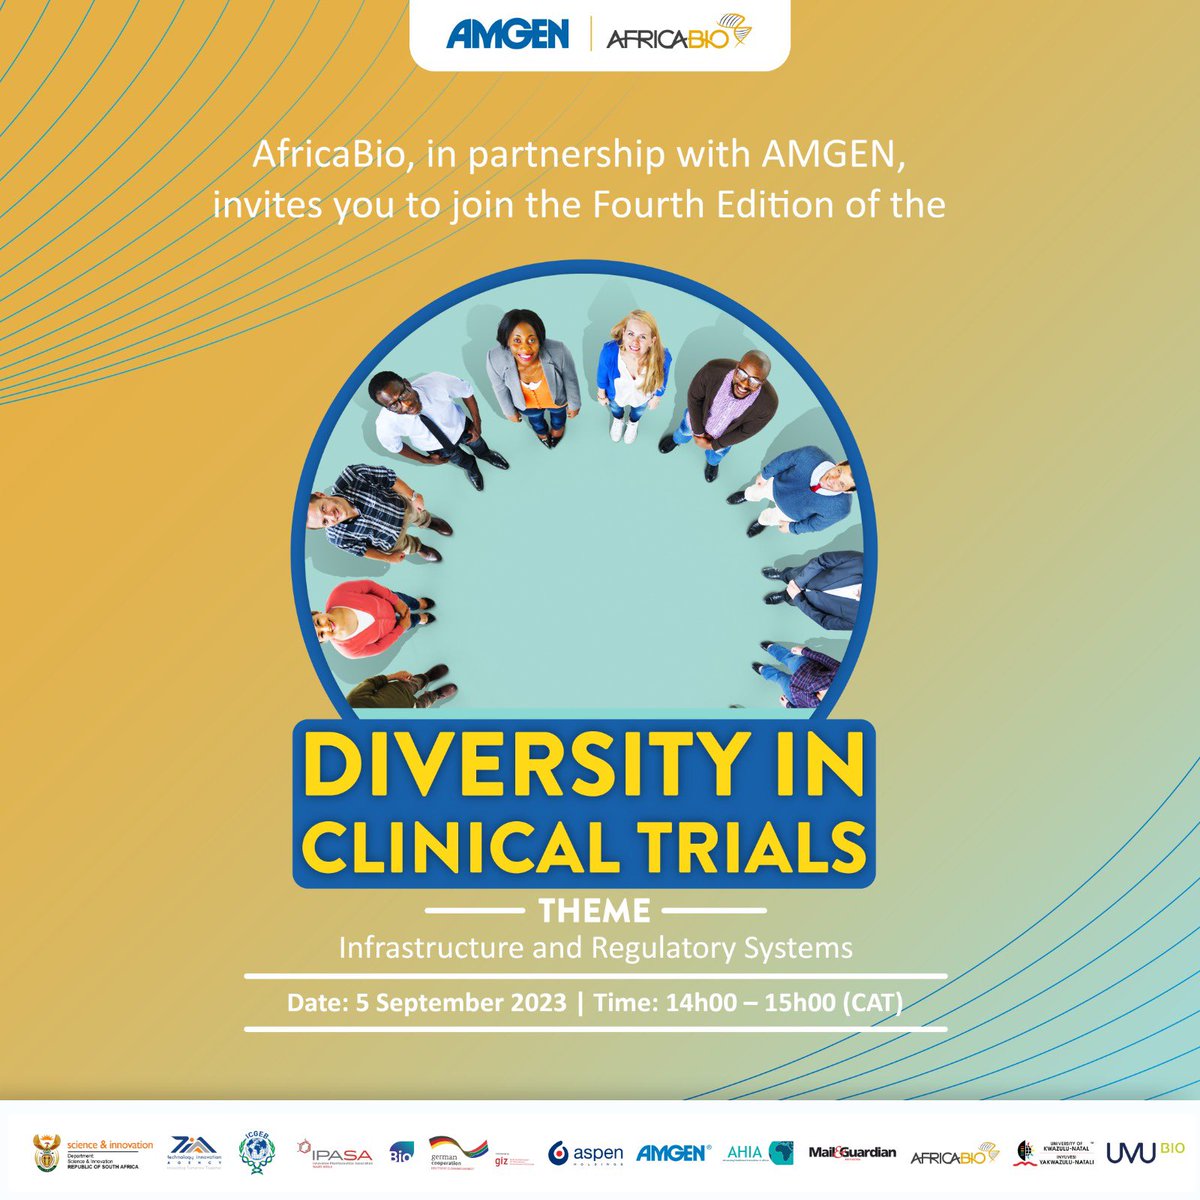 Live Now!!! We have a Diversity in Clinical Trials session in partnership with Amgen discussing infrastructure and Regulatory Systems. You can stream it here: youtube.com/live/Qm0ezqyOS…